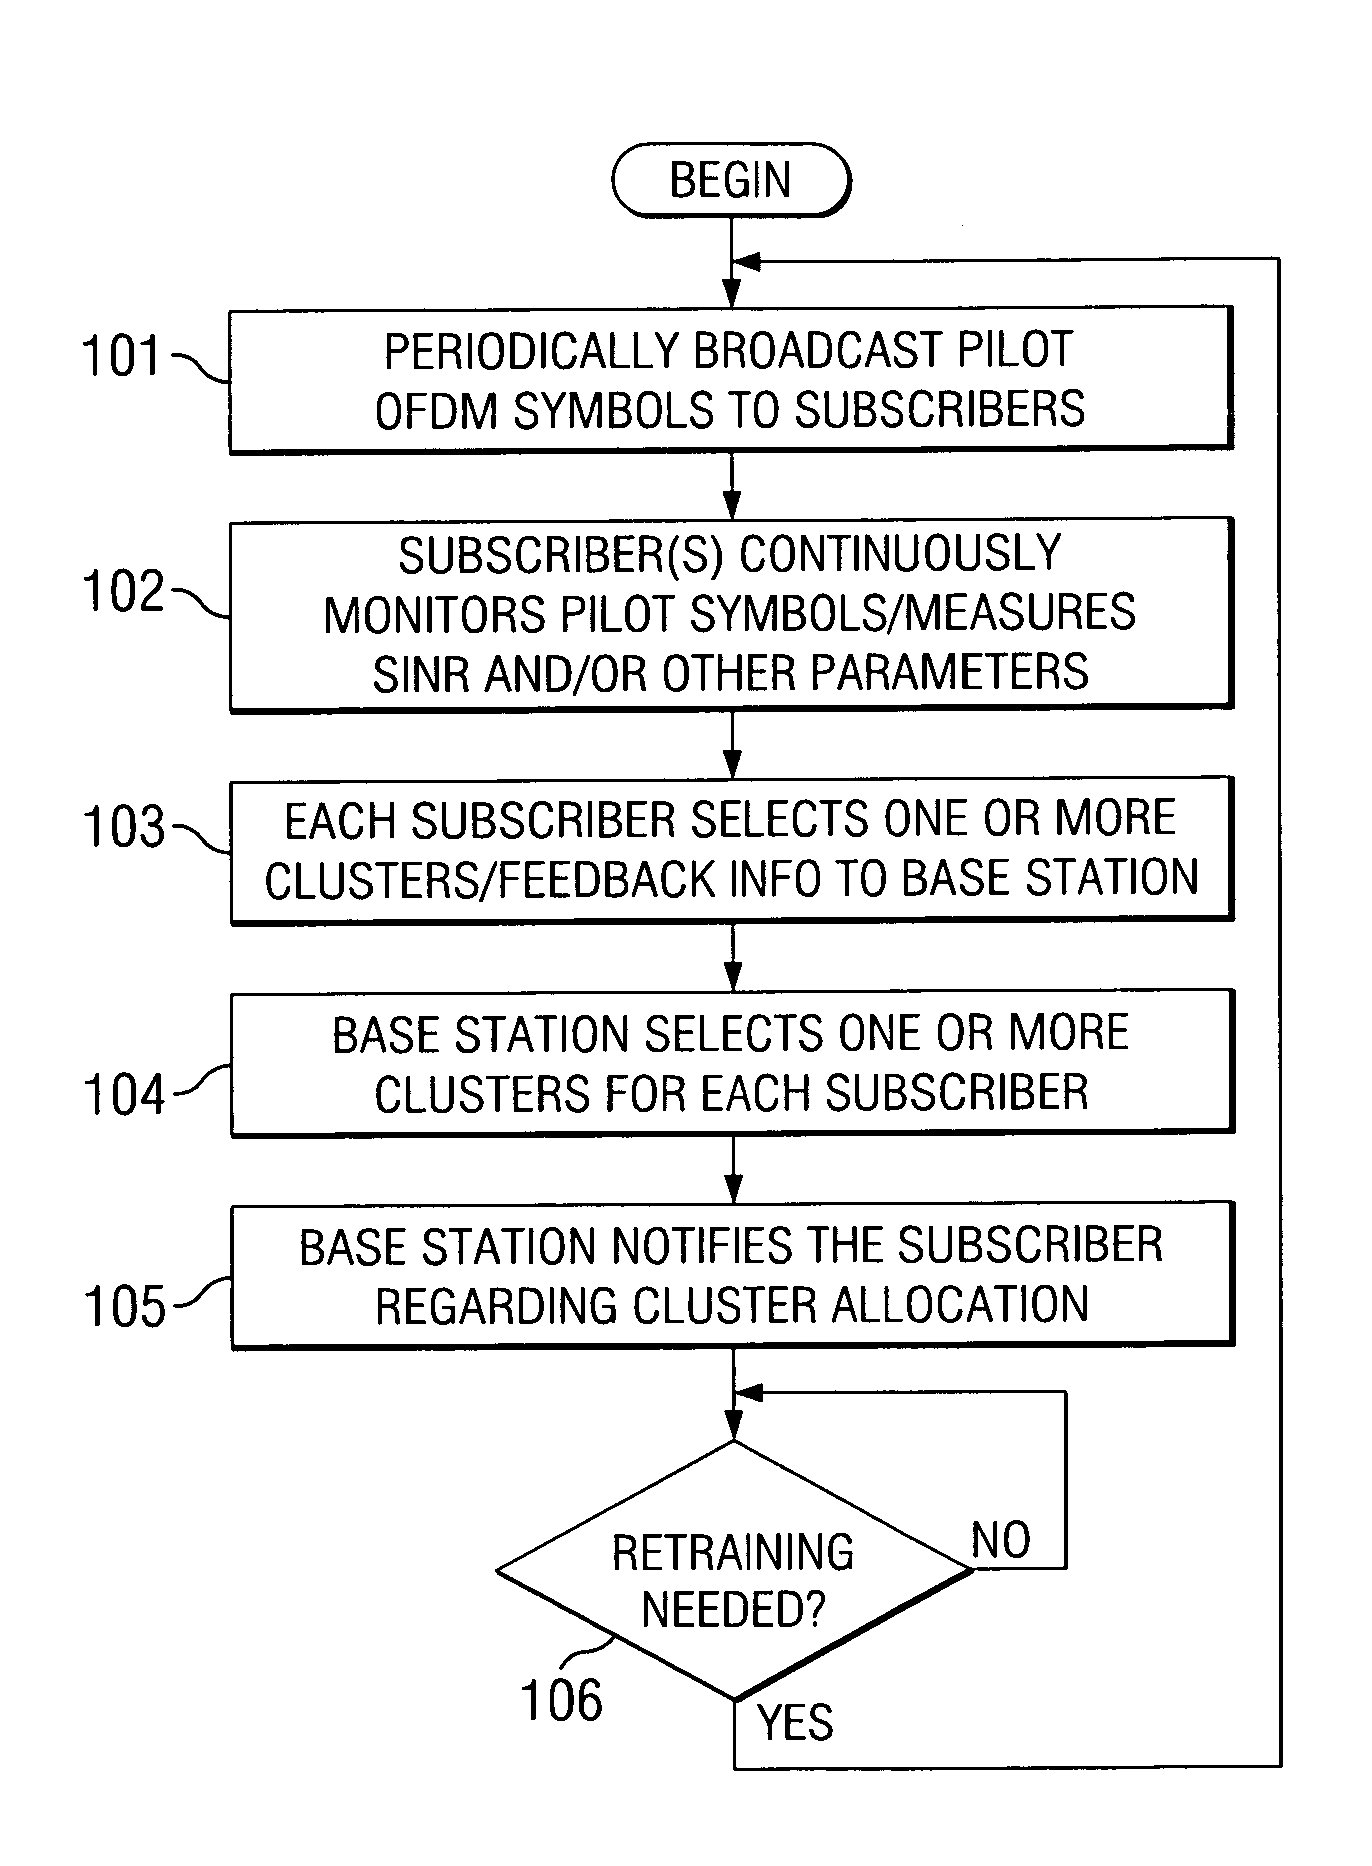 Multi-carrier communication with time division multiplexing and carrier-selective loading